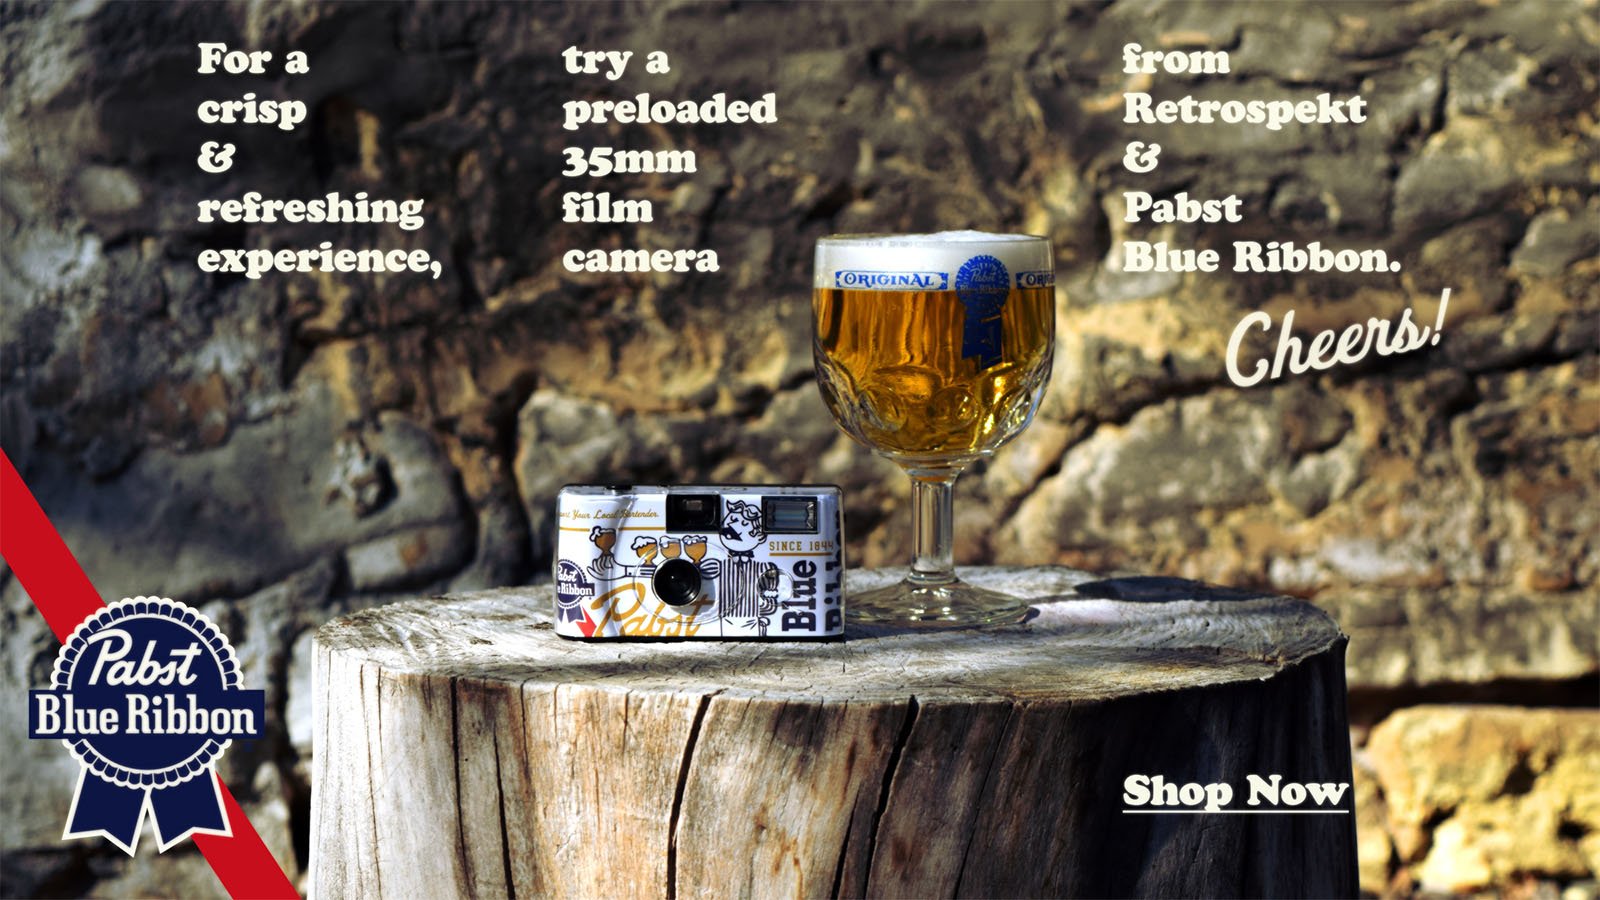 A vintage-style 35mm film camera is placed on a tree stump beside a glass of Pabst Blue Ribbon beer. The text promotes a collaboration between Retrospekt and Pabst Blue Ribbon for a preloaded film camera. The background features a serene natural setting.